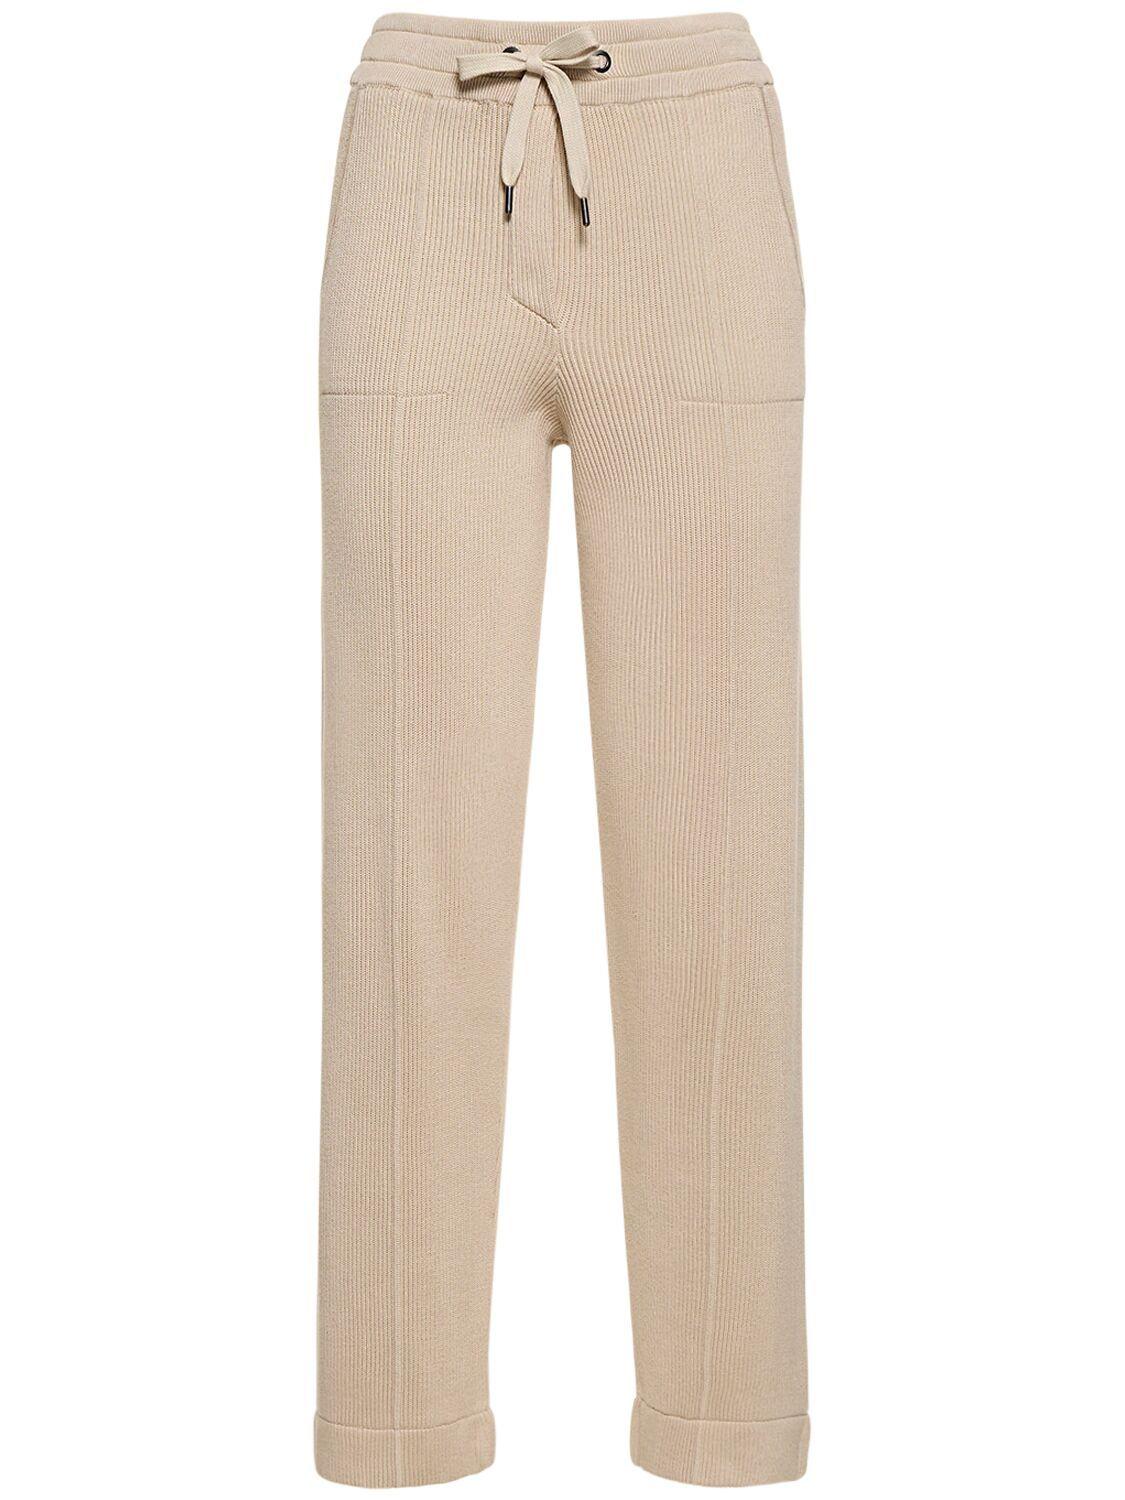 Brunello Cucinelli Cotton Knit jogger Pants in Natural